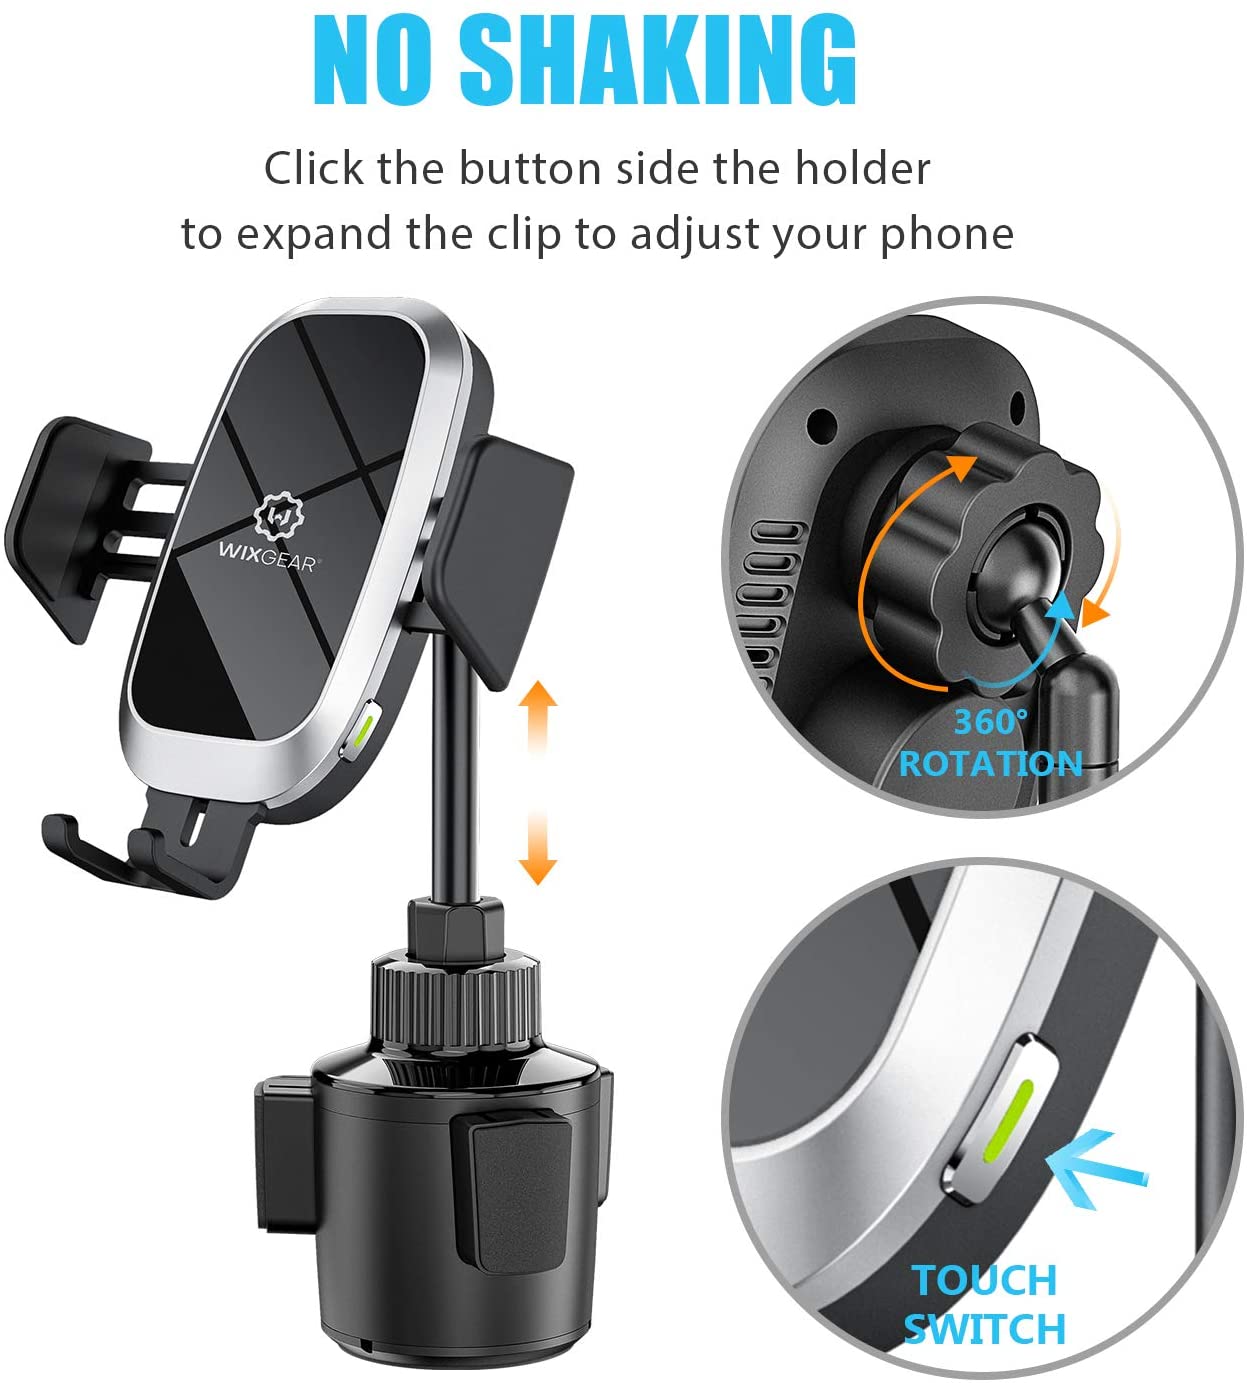 Wireless Car Charger, WixGear Auto-Clamping Fast Wireless Car Charger, Cup Phone Holder for Car, 10W Qi Fast Charging